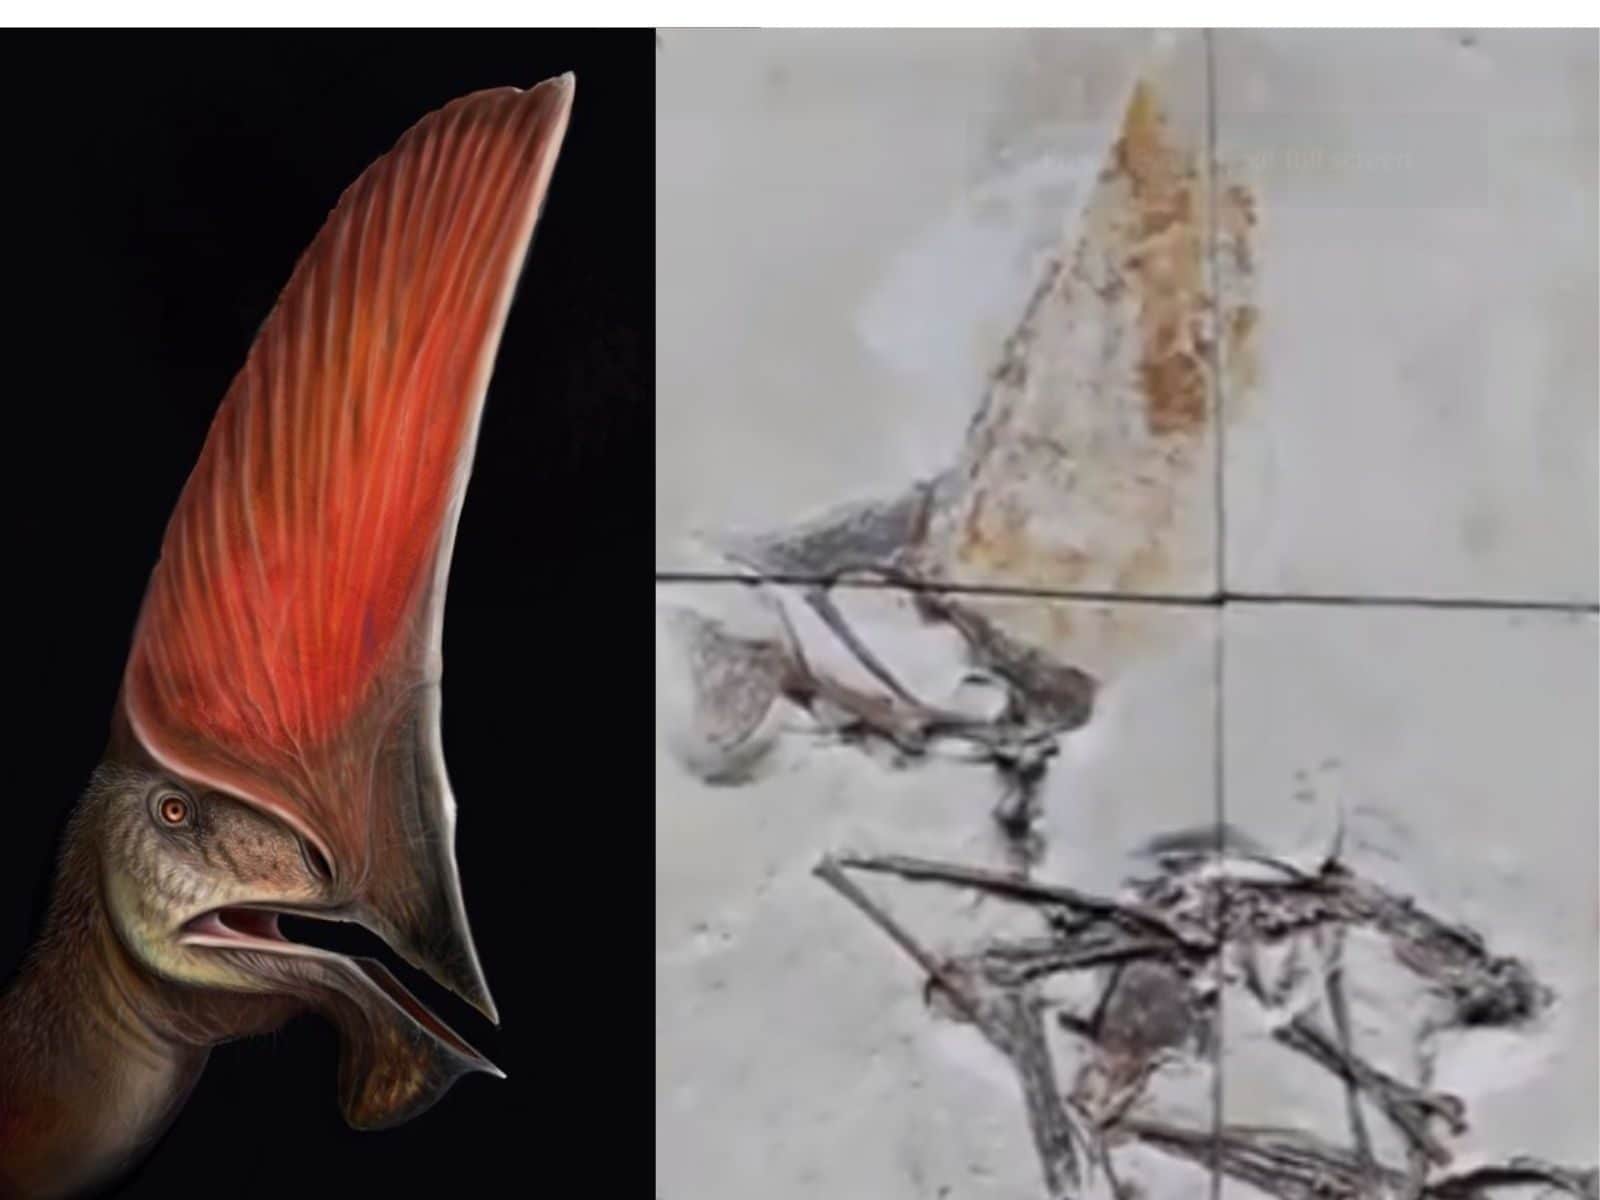 Species New to Science: [Paleontology • 2019] Keresdrakon vilsoni • A New  Toothless Pterosaur (Pterodactyloidea) from Southern Brazil with Insights  Into the Paleoecology of A Cretaceous Desert